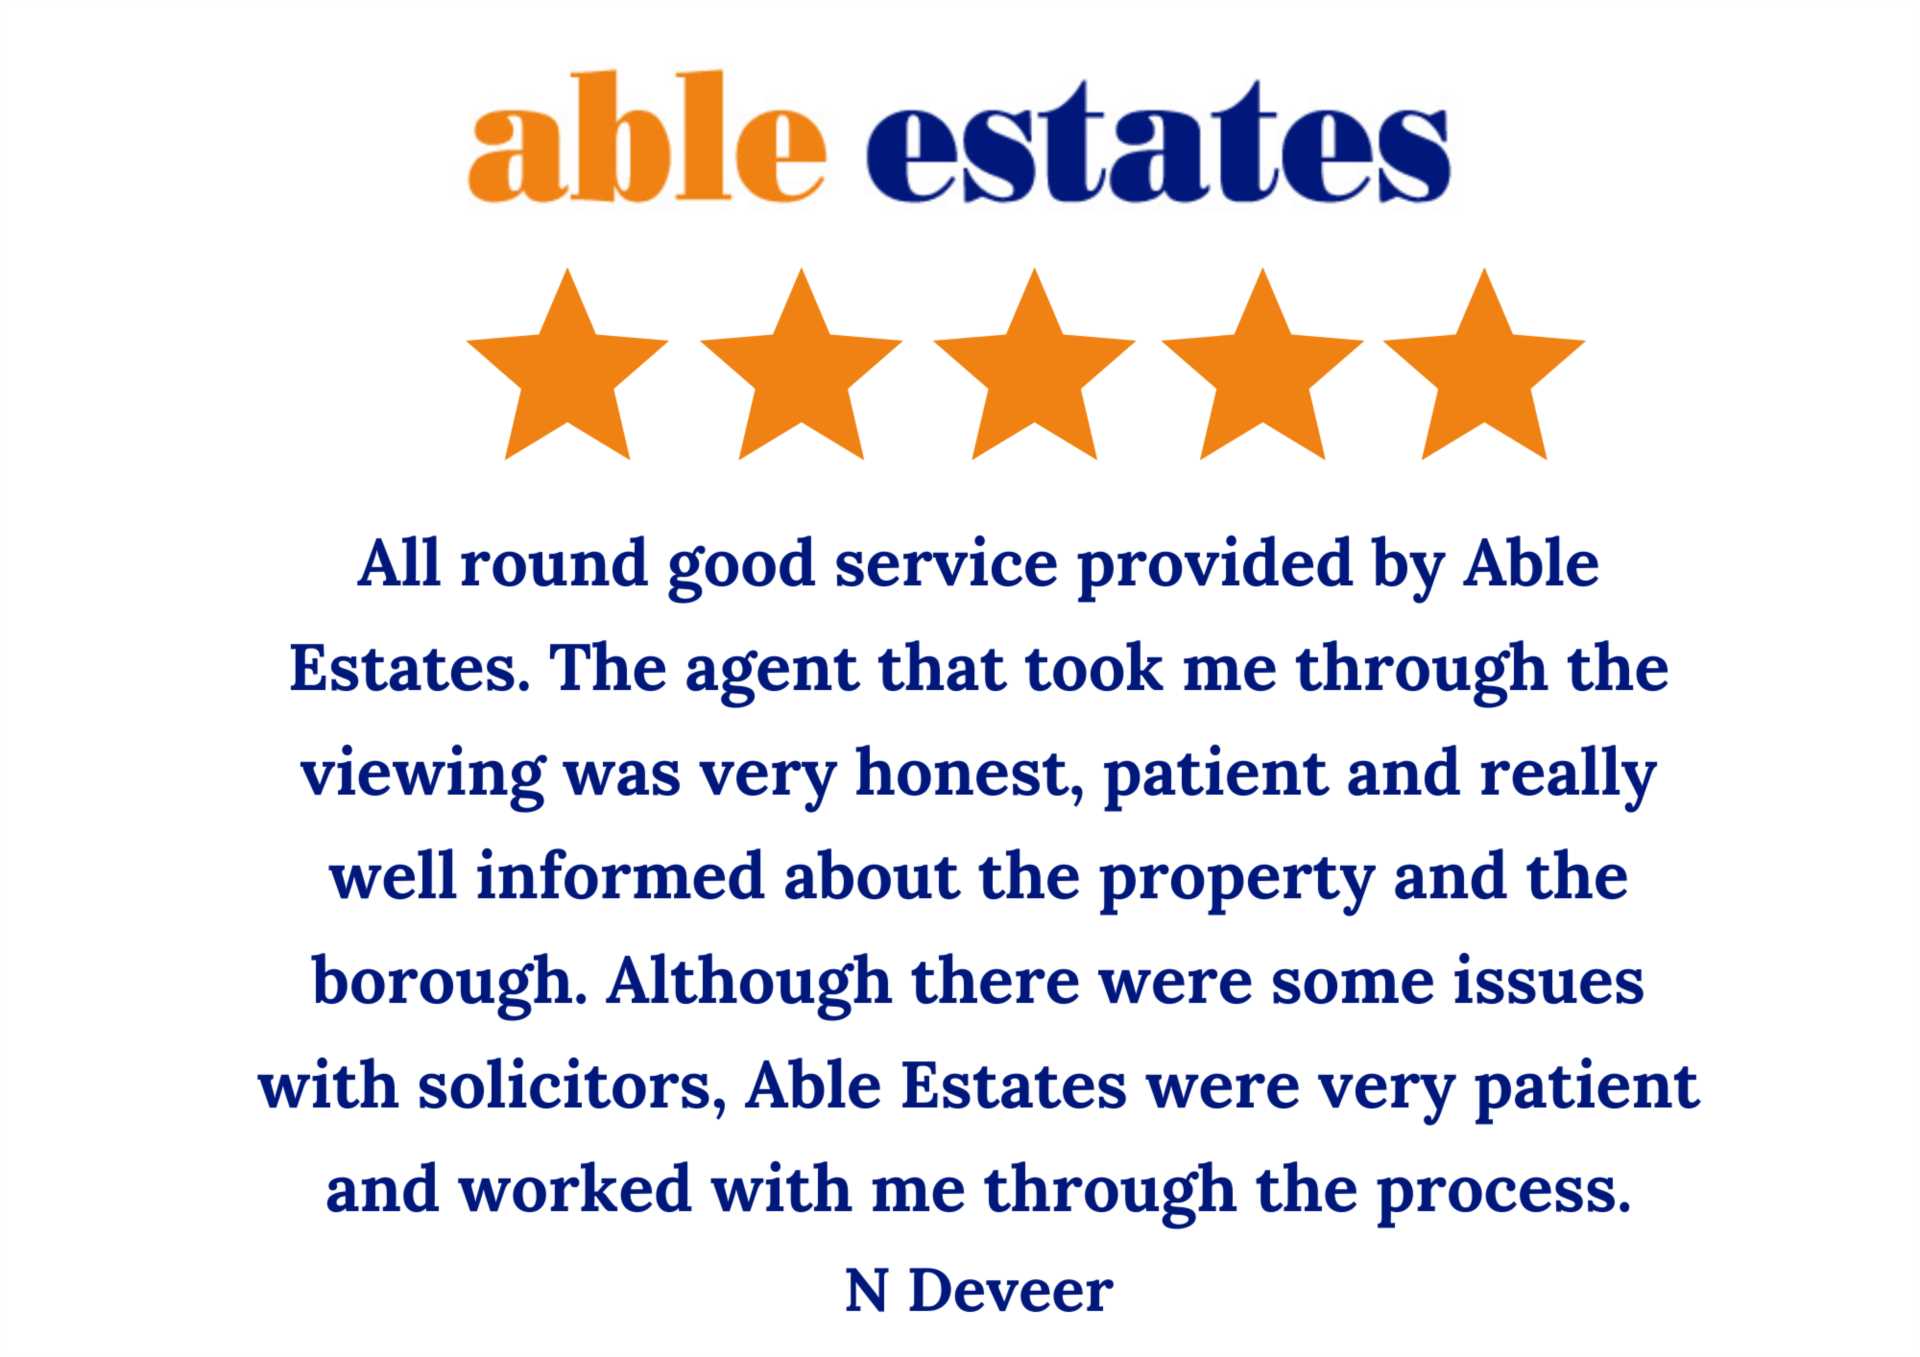 5 Star review for our Sales Team